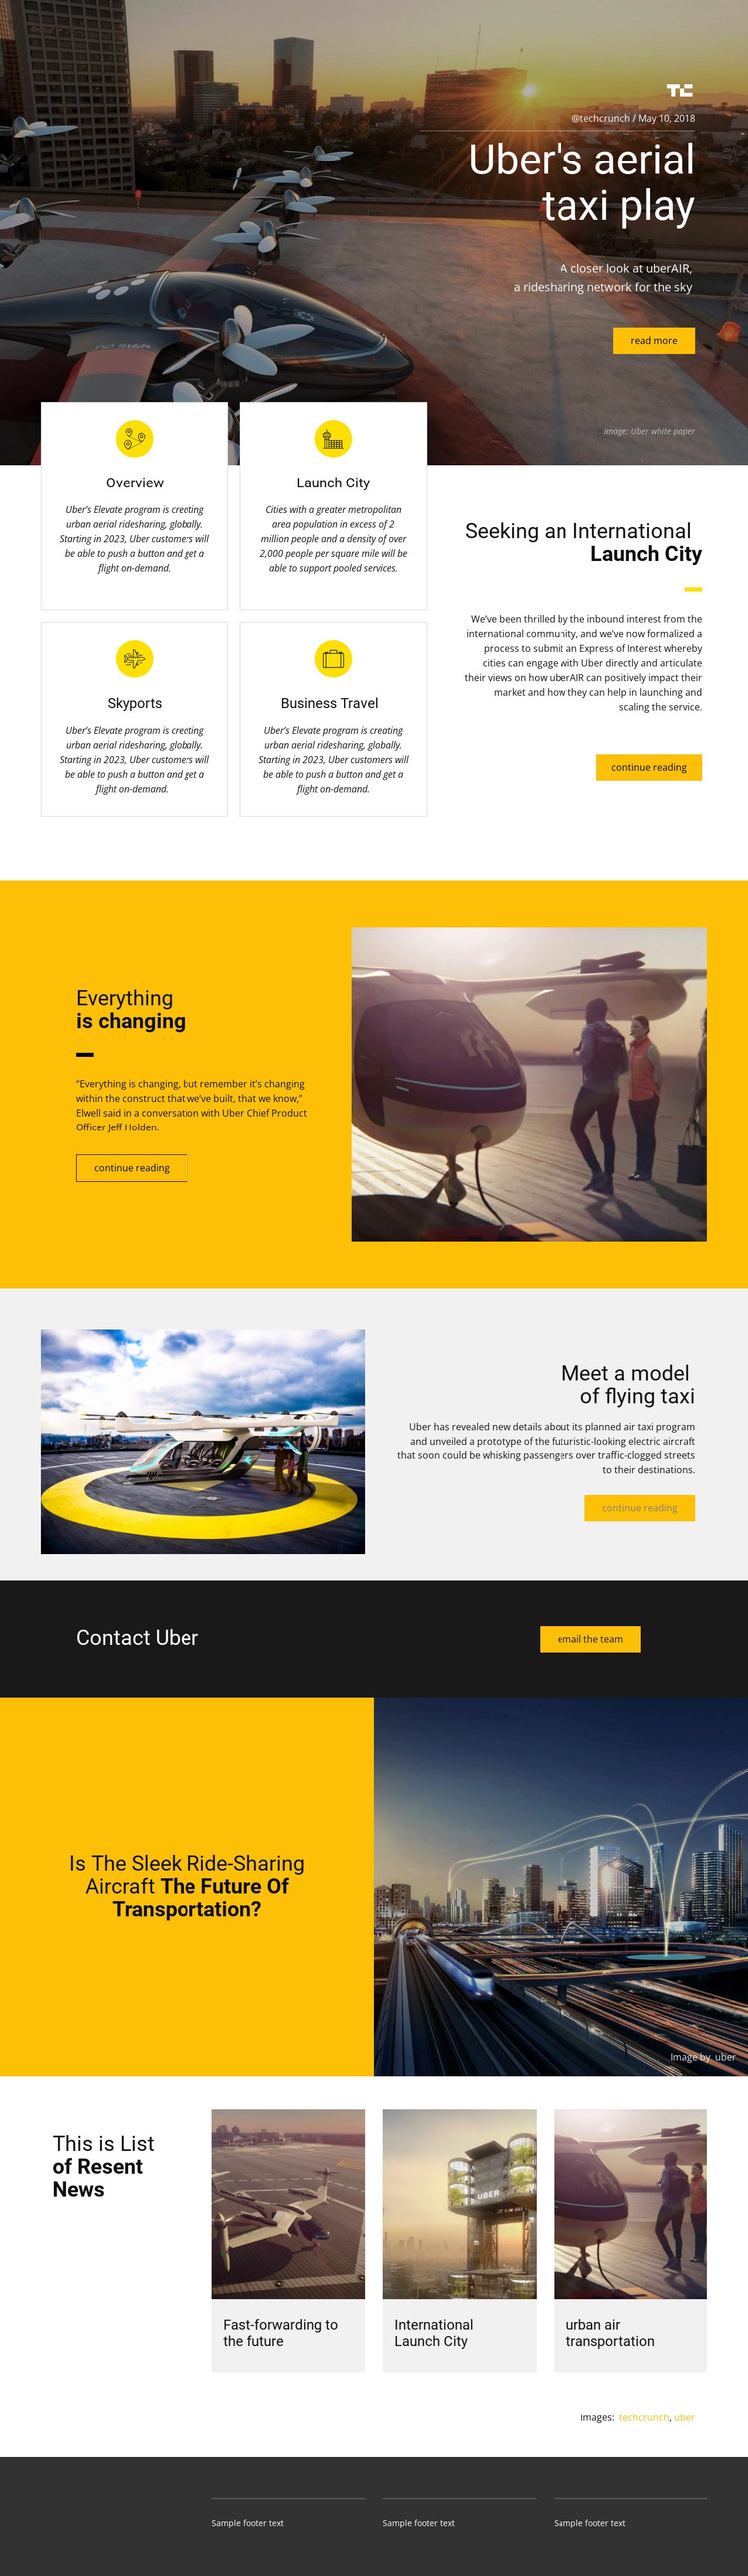 Uber's Aerial Taxi Play Web Design